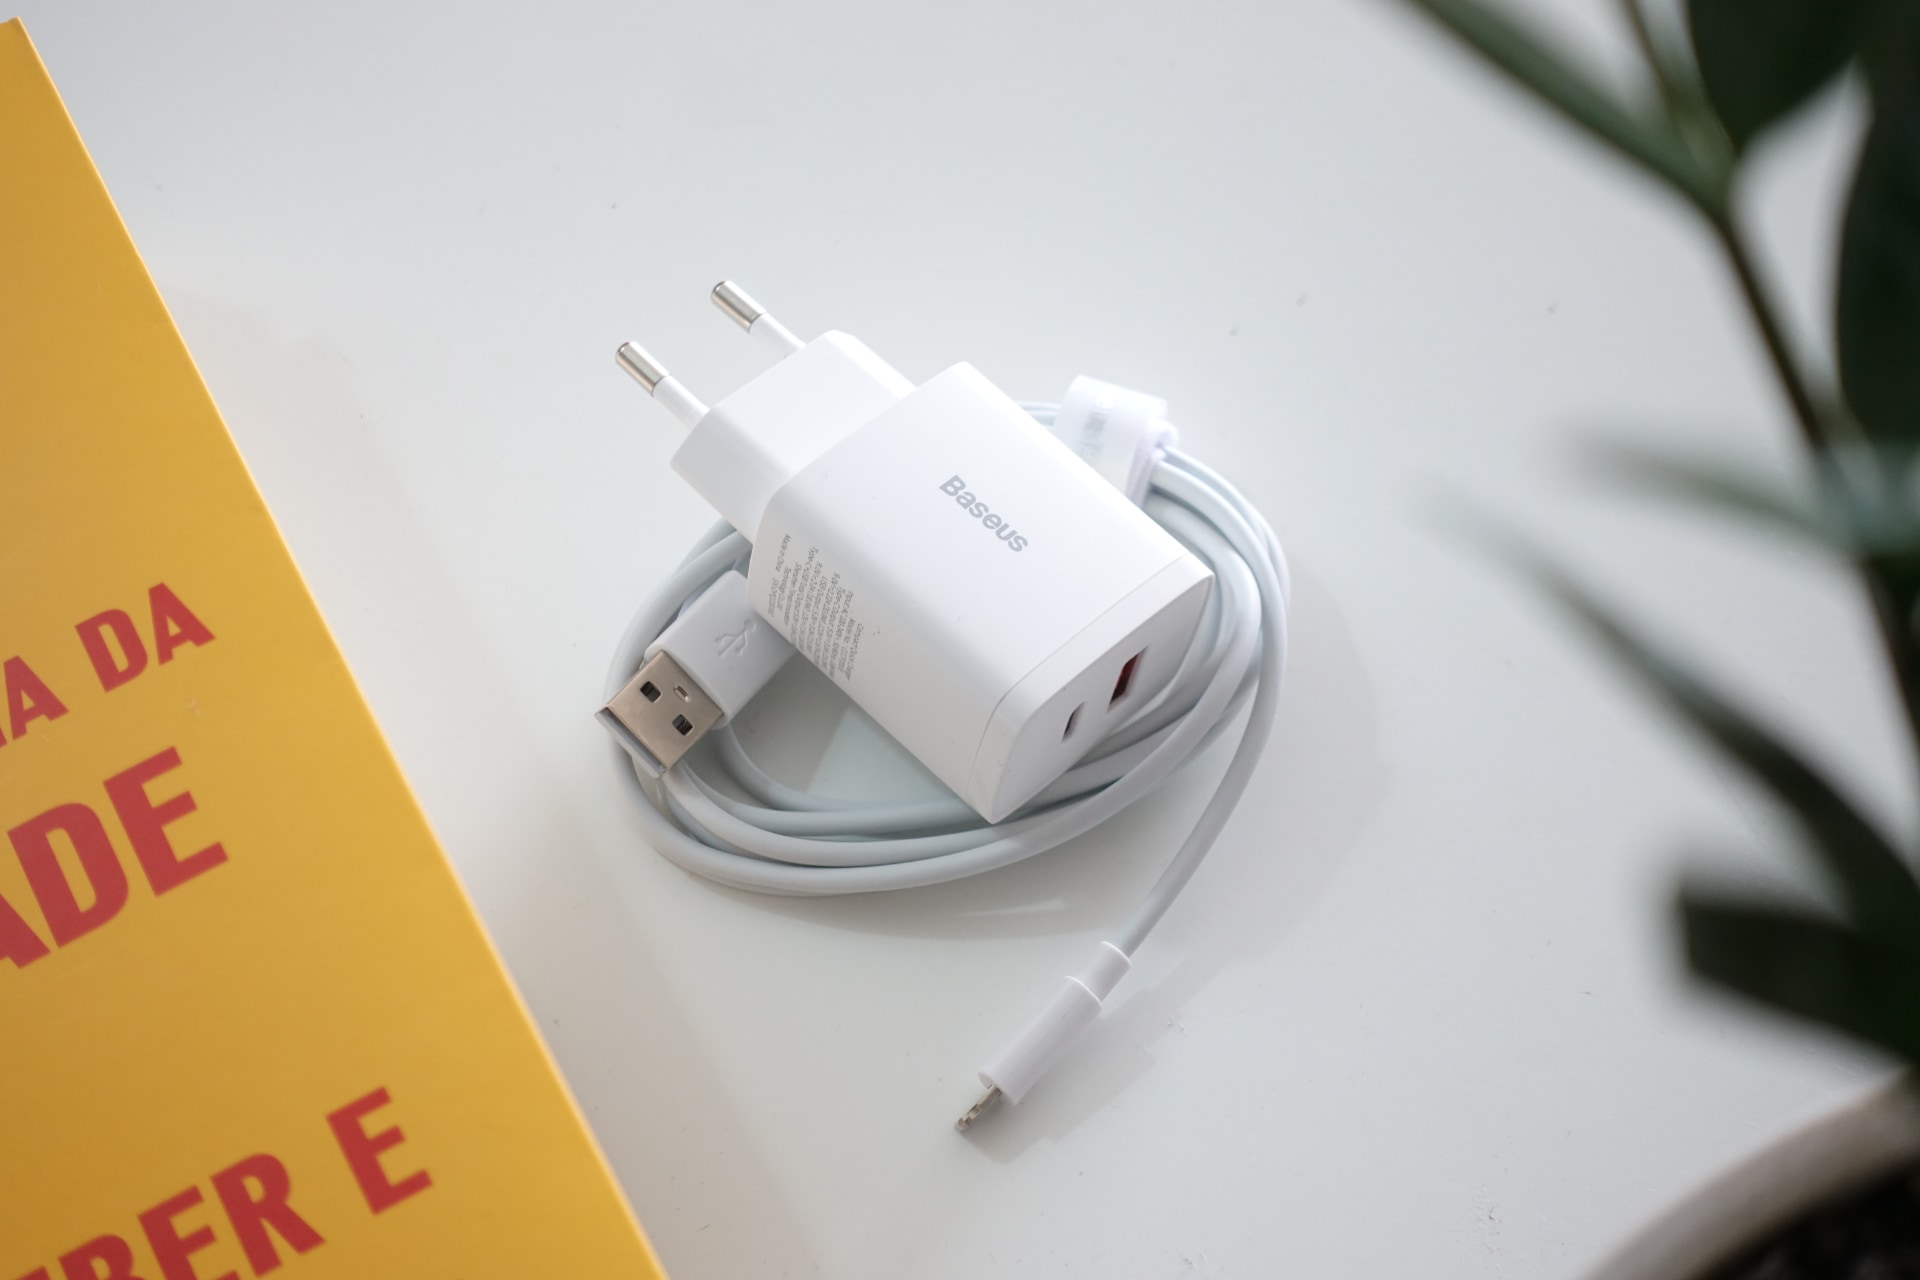 A wall charger from Baseus on a blank surface, with a partial book on the left and an out of focus plant on the right.